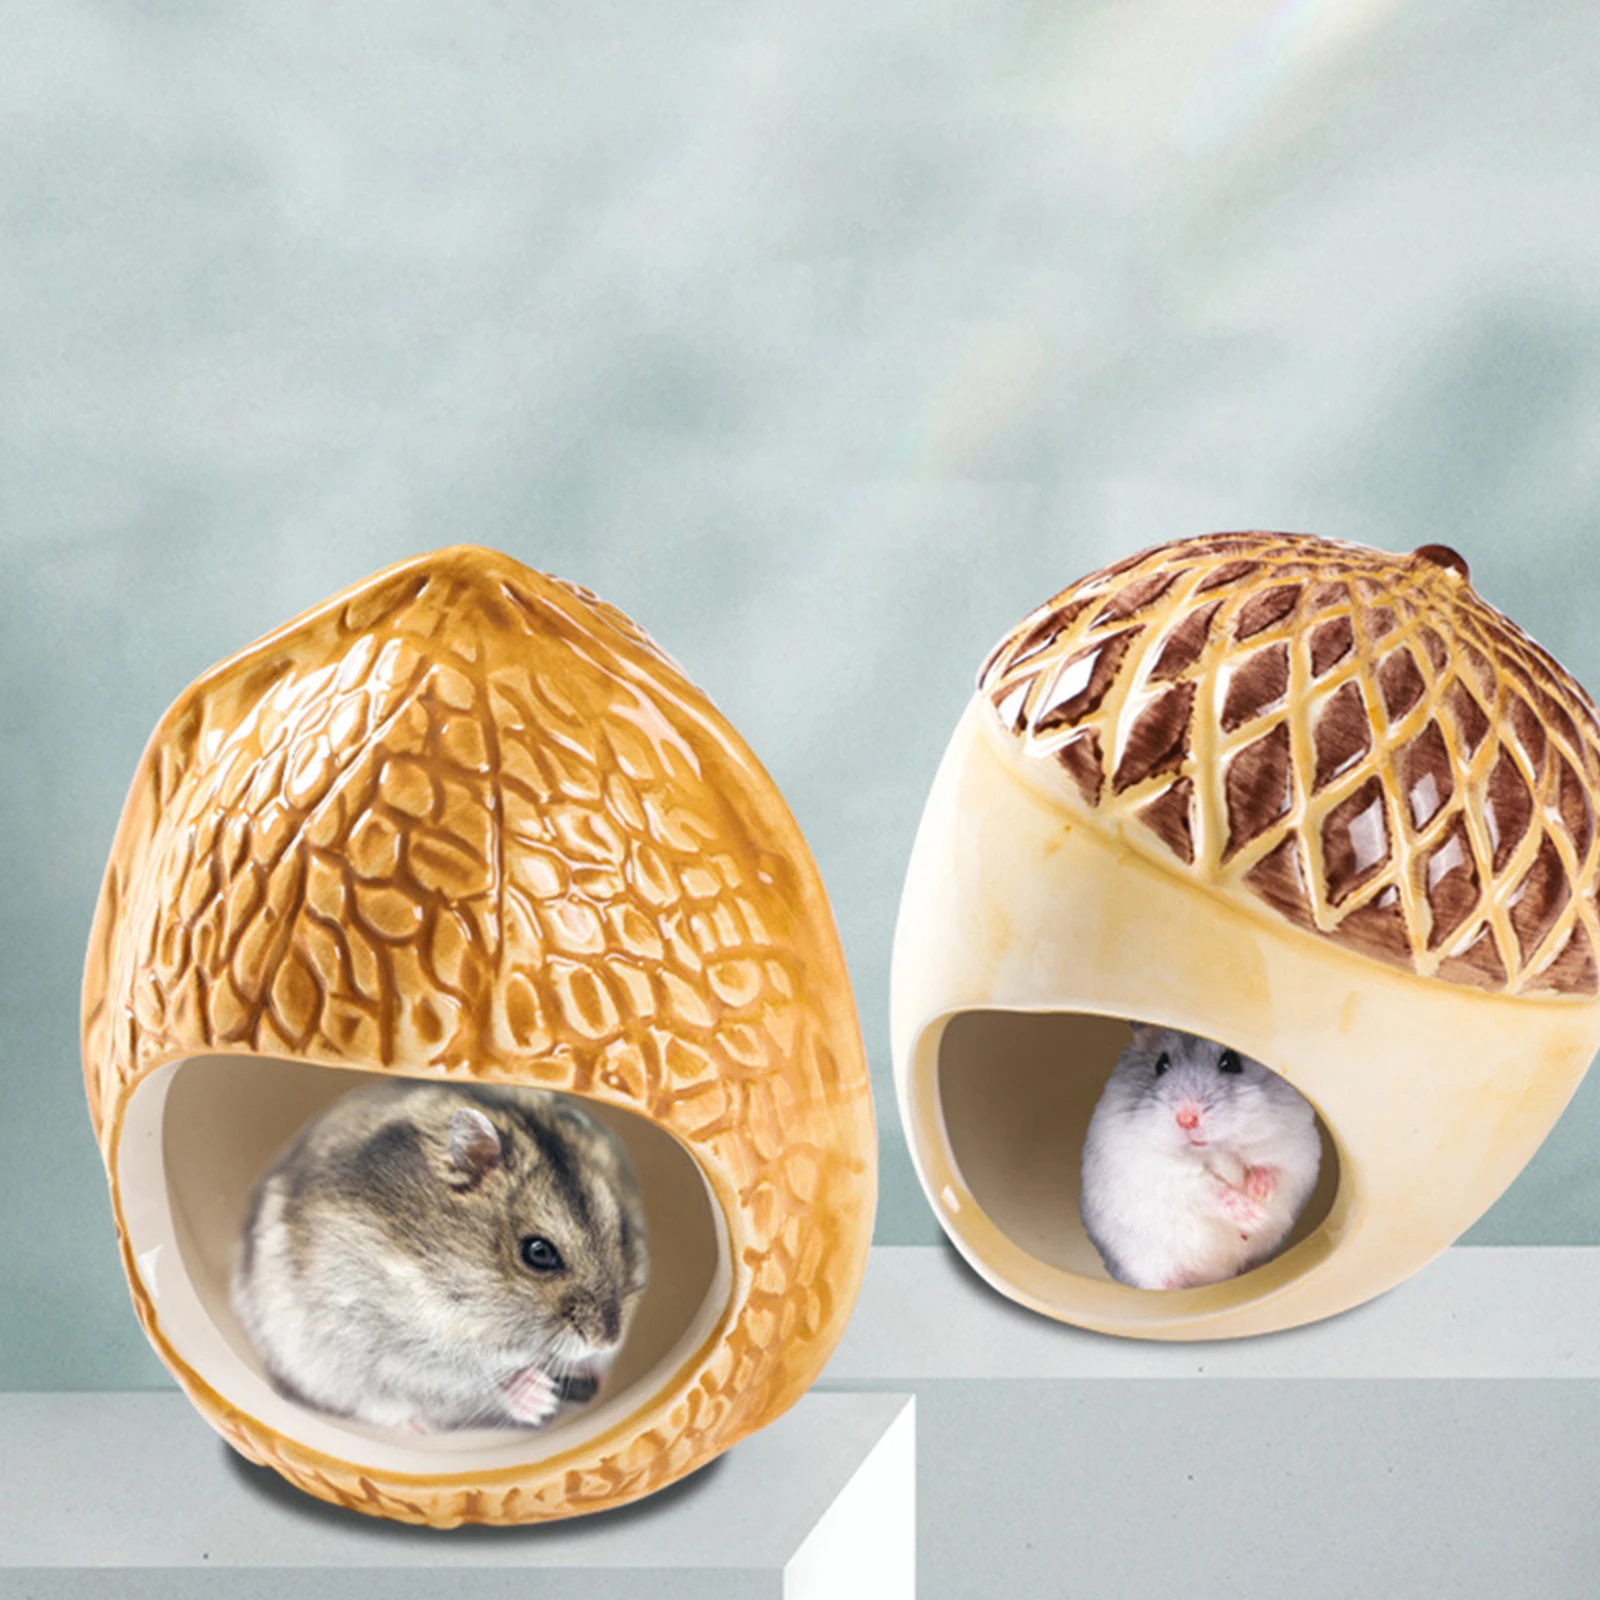 Hamster House Toys Home and Bath for Small Animal Sugar Glider Squirrel Chinchilla Hamster Rat Playing Sleeping Chinchilla Cage Accessories Ceramic Hamster Bedding Hideout Nest 